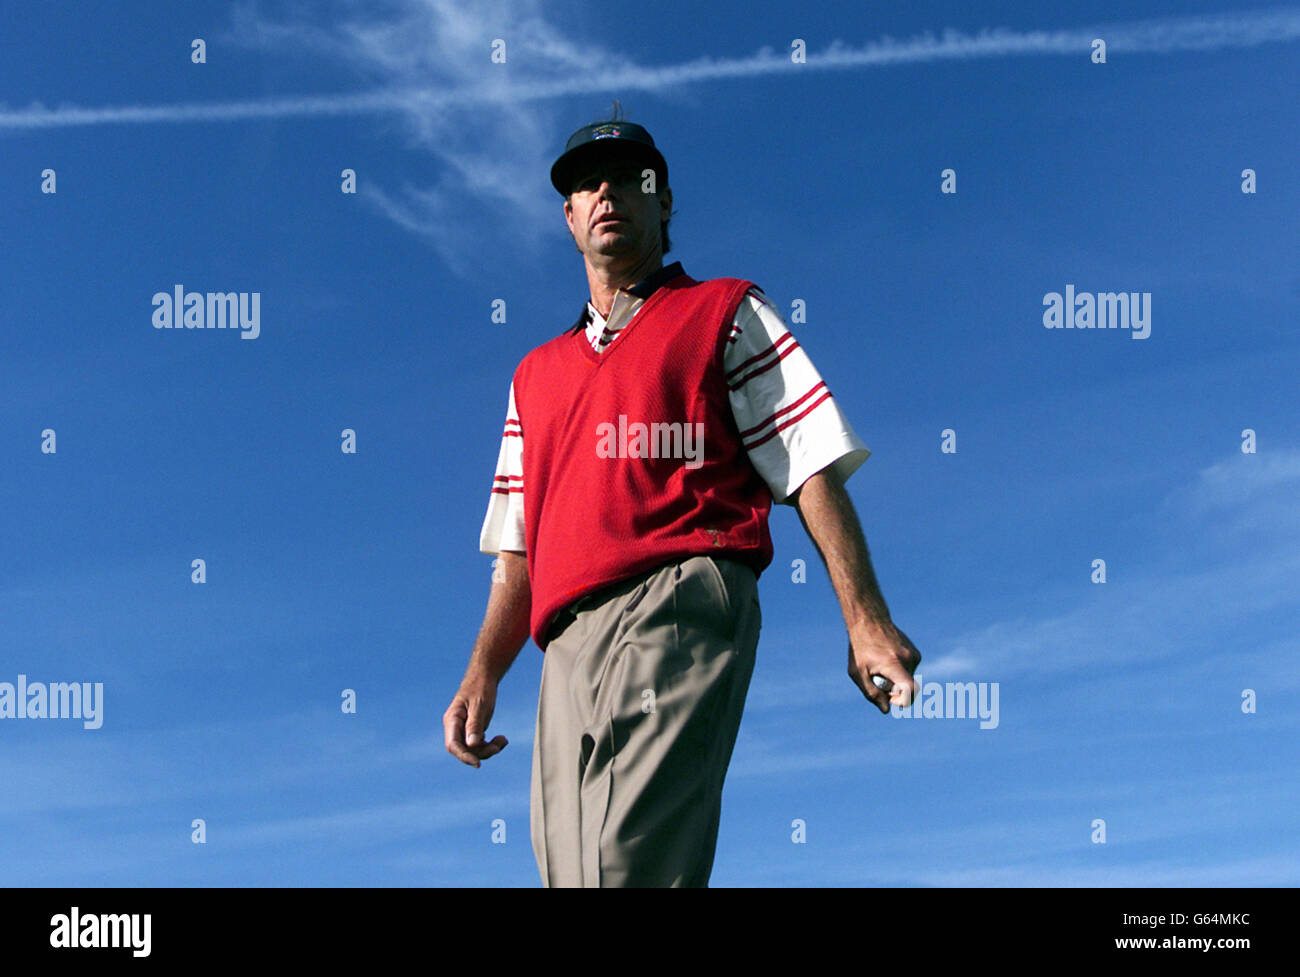 Ryder-Cup-Praxis Stockfoto